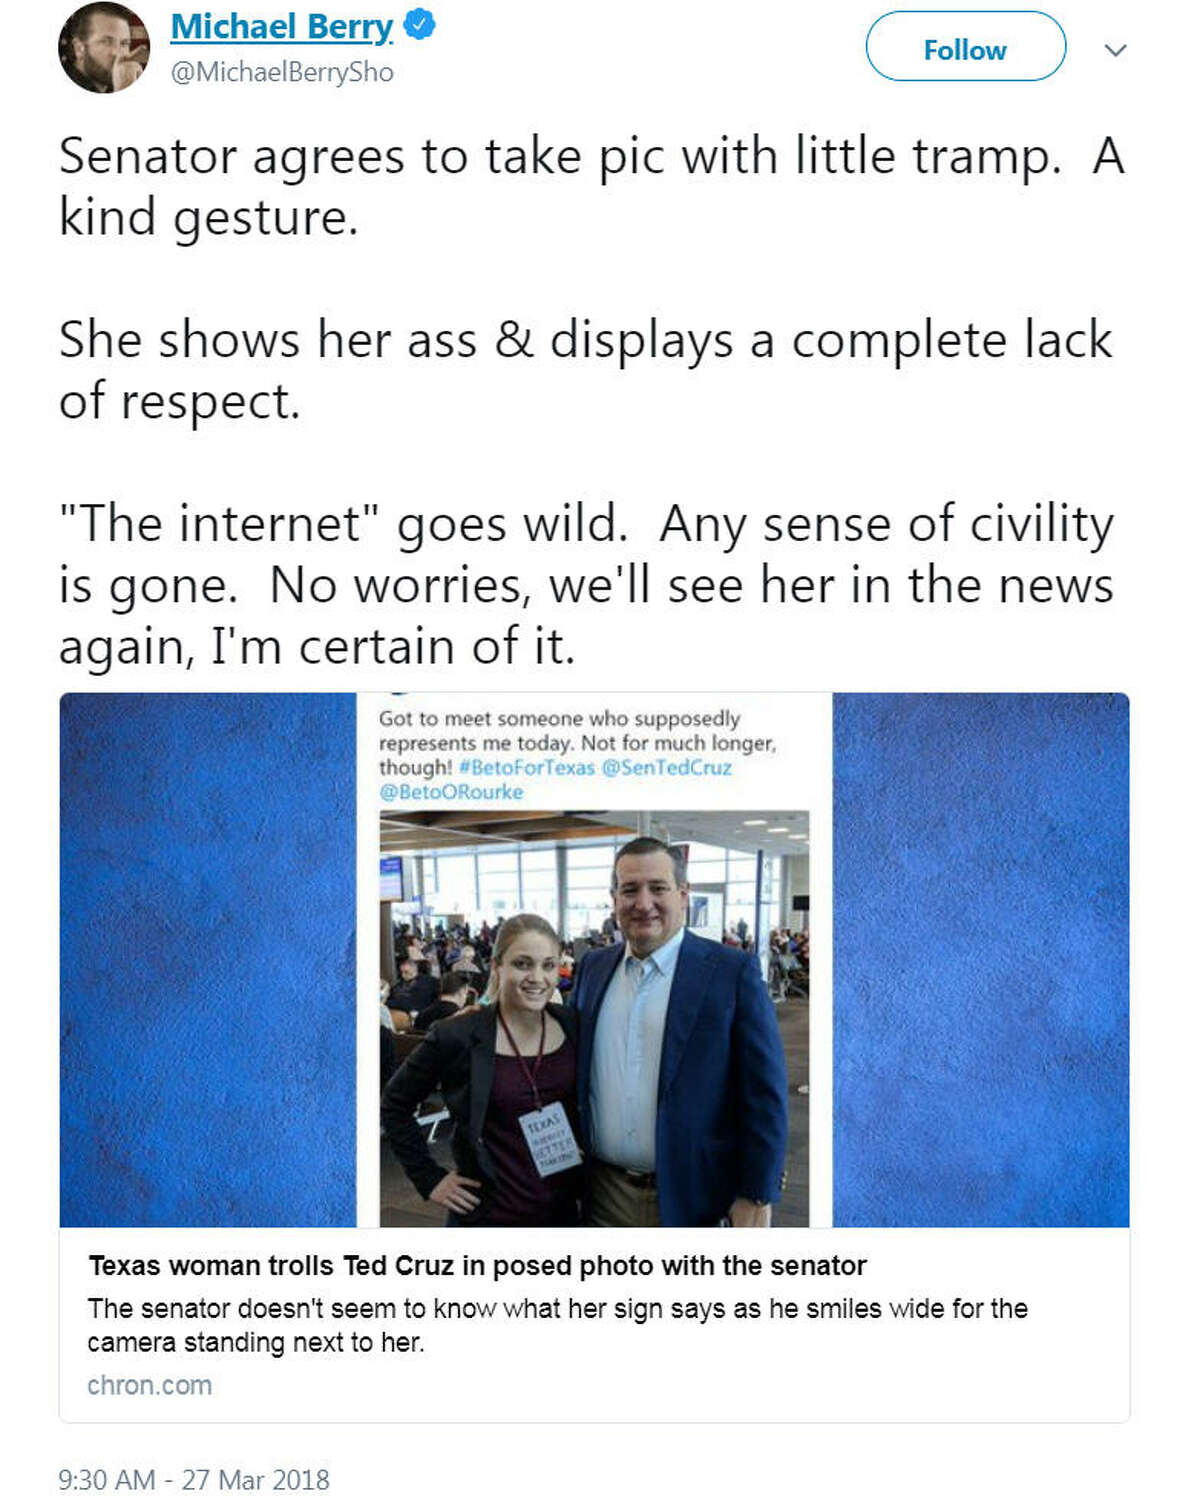 Houston talk show host Michael Berry called the woman who trolled Sen. Ted Cruz in a photo a "little tramp" in a March 27, 2018 tweet. Image source: TwitterScroll ahead to test your knowledge of Sen. Ted Cruz. 